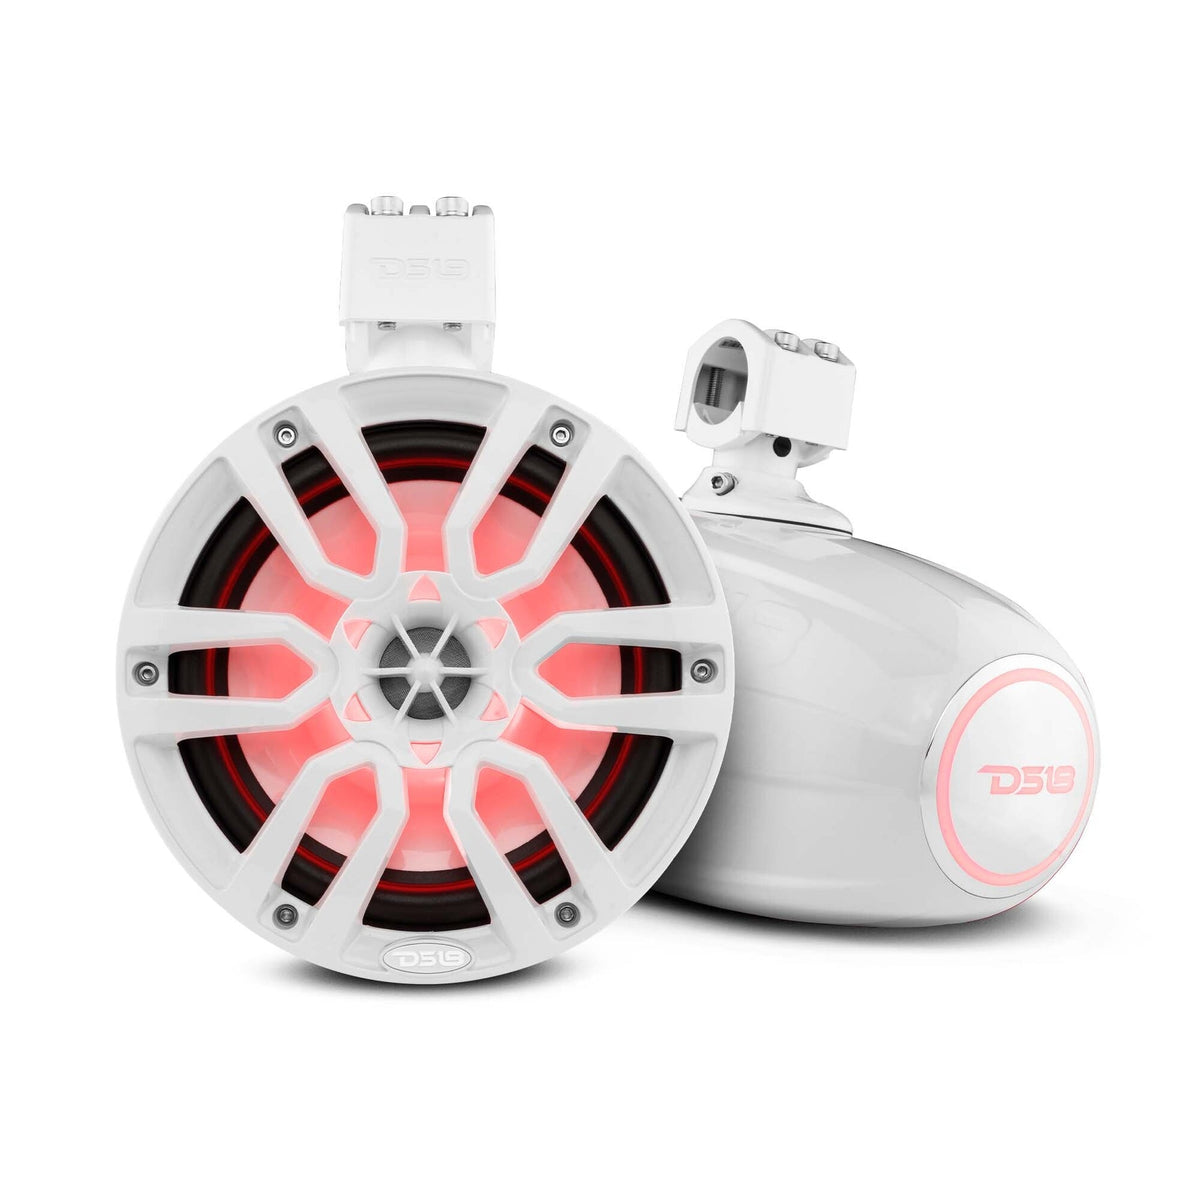 NXL 8" Marine Water Resistant Wakeboard Tower Speakers with Integrated RGB LED Lights 375 Watts